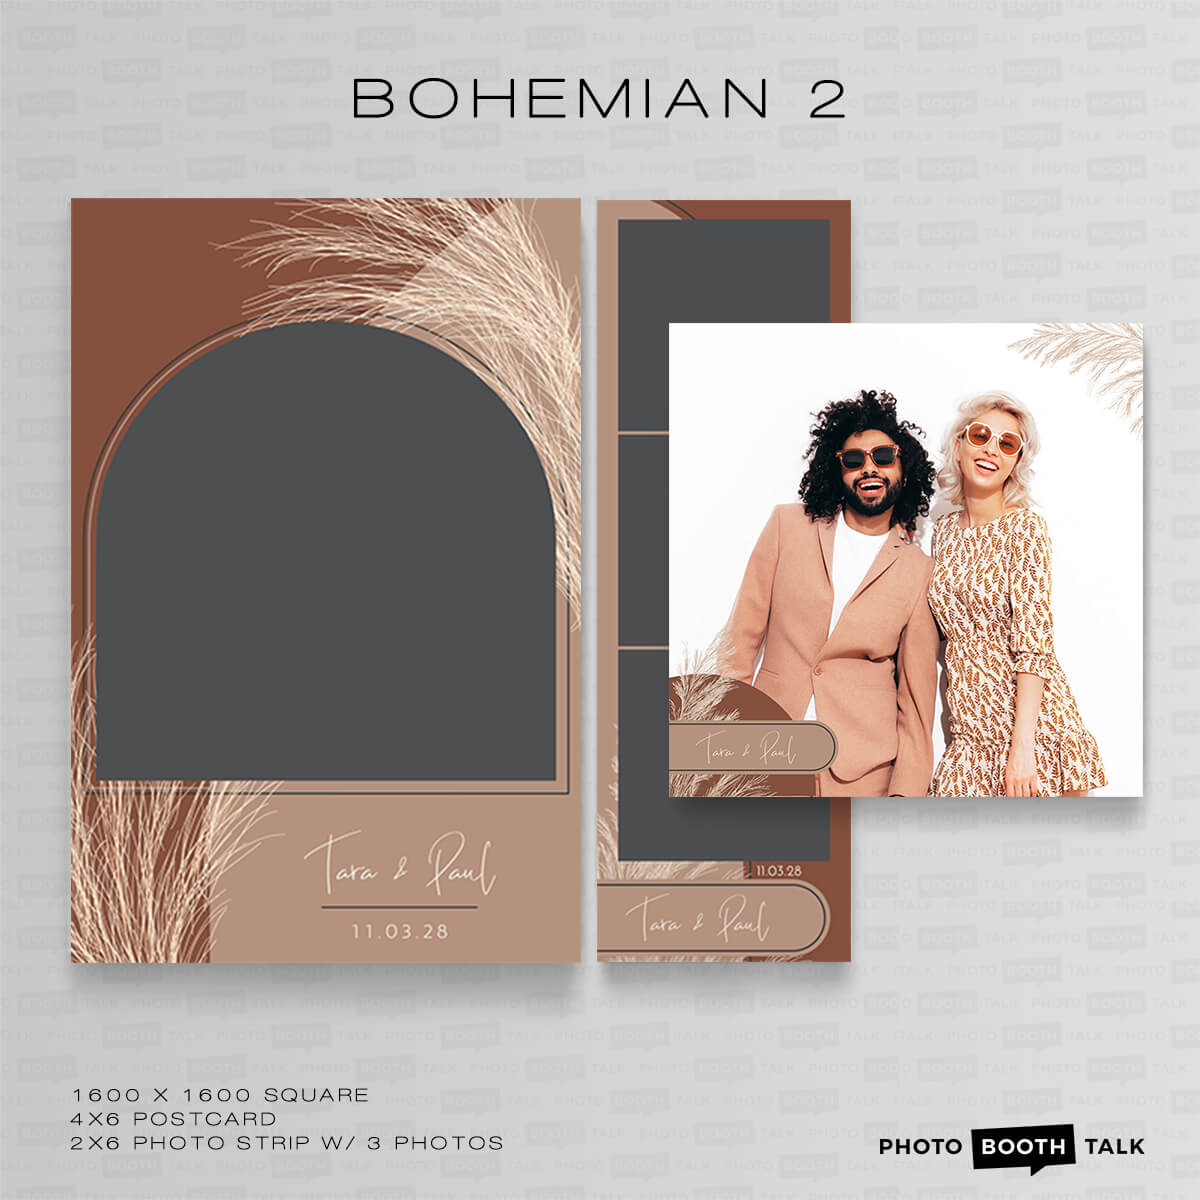 Bohemian 2 Square For Canva Photo Booth Talk